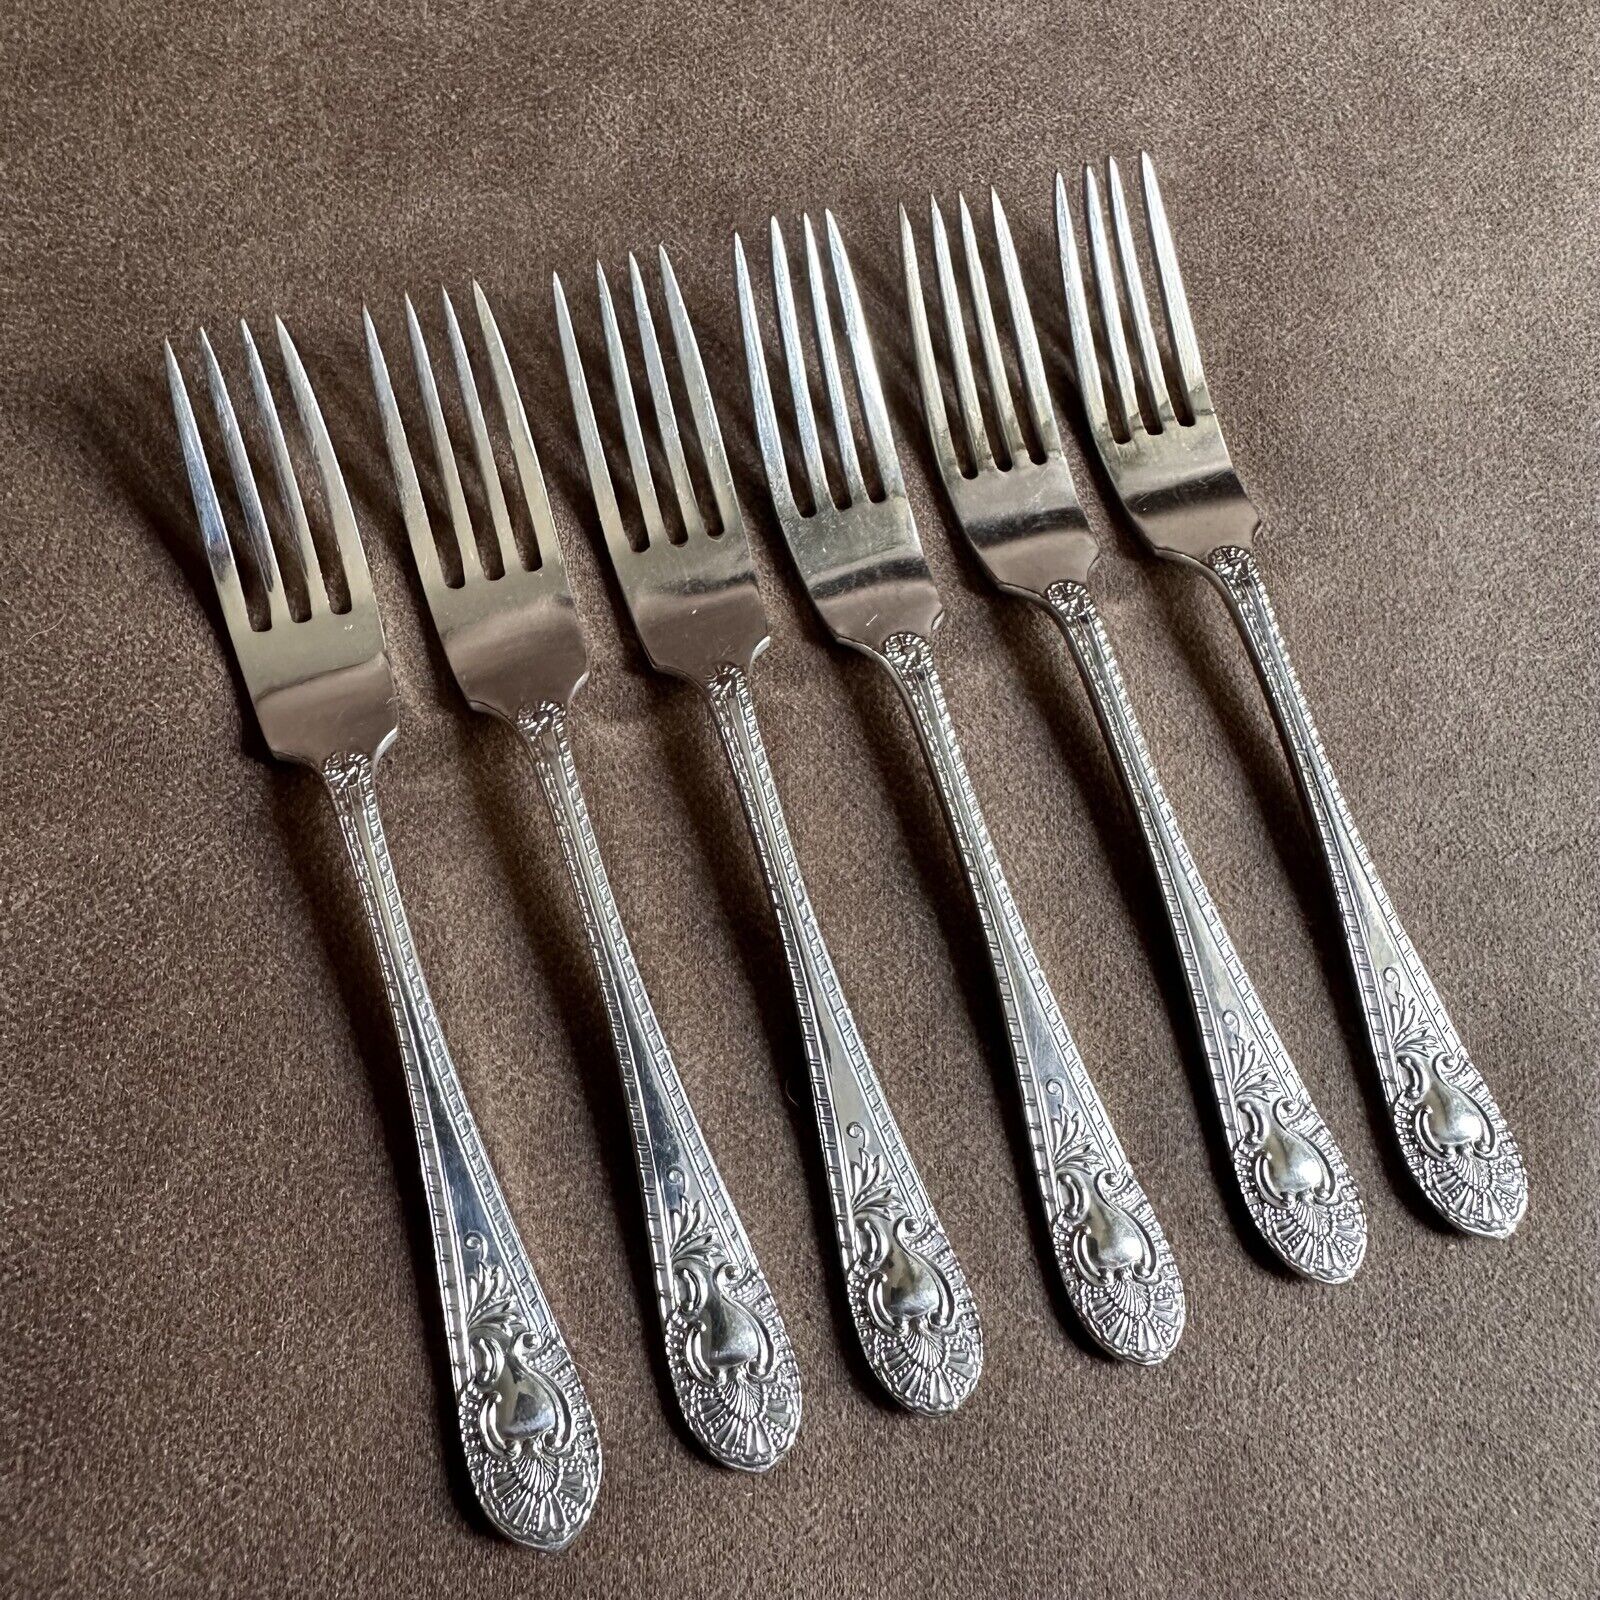 6x ANTIQUE W & Co EP ENGLAND SILVER PLATE CUTLERY FRUIT FORKS MADE IN ENGLAND